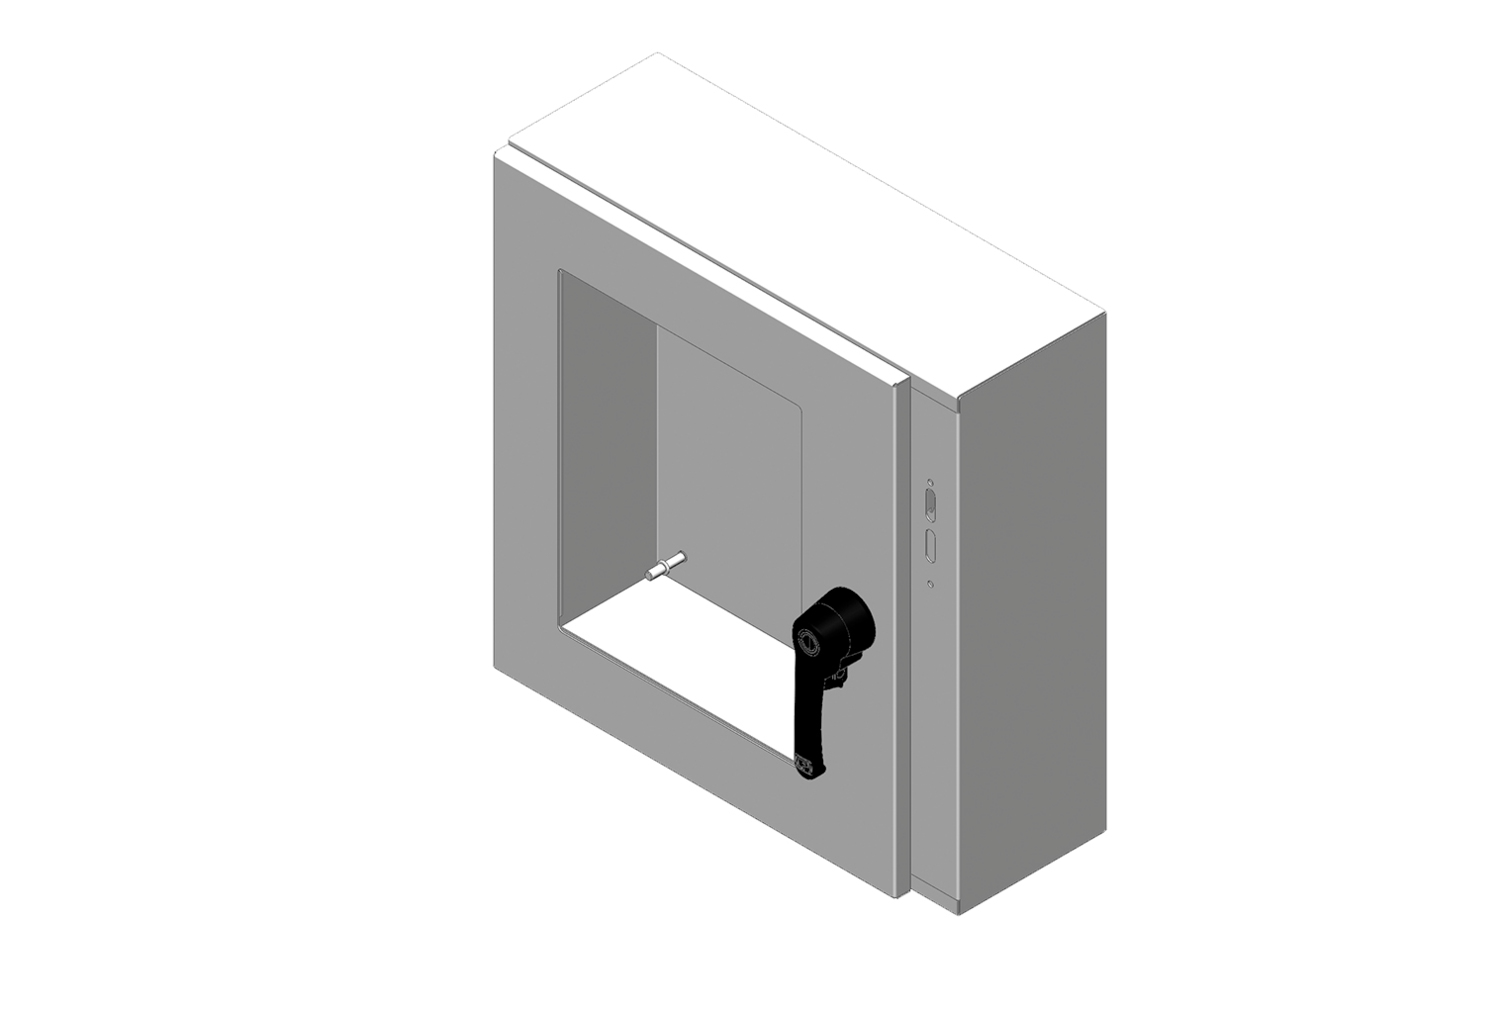 RMR Standard Wall-Mount Disconnect Enclosure, Type 4, with Solid Single Door - Image 3